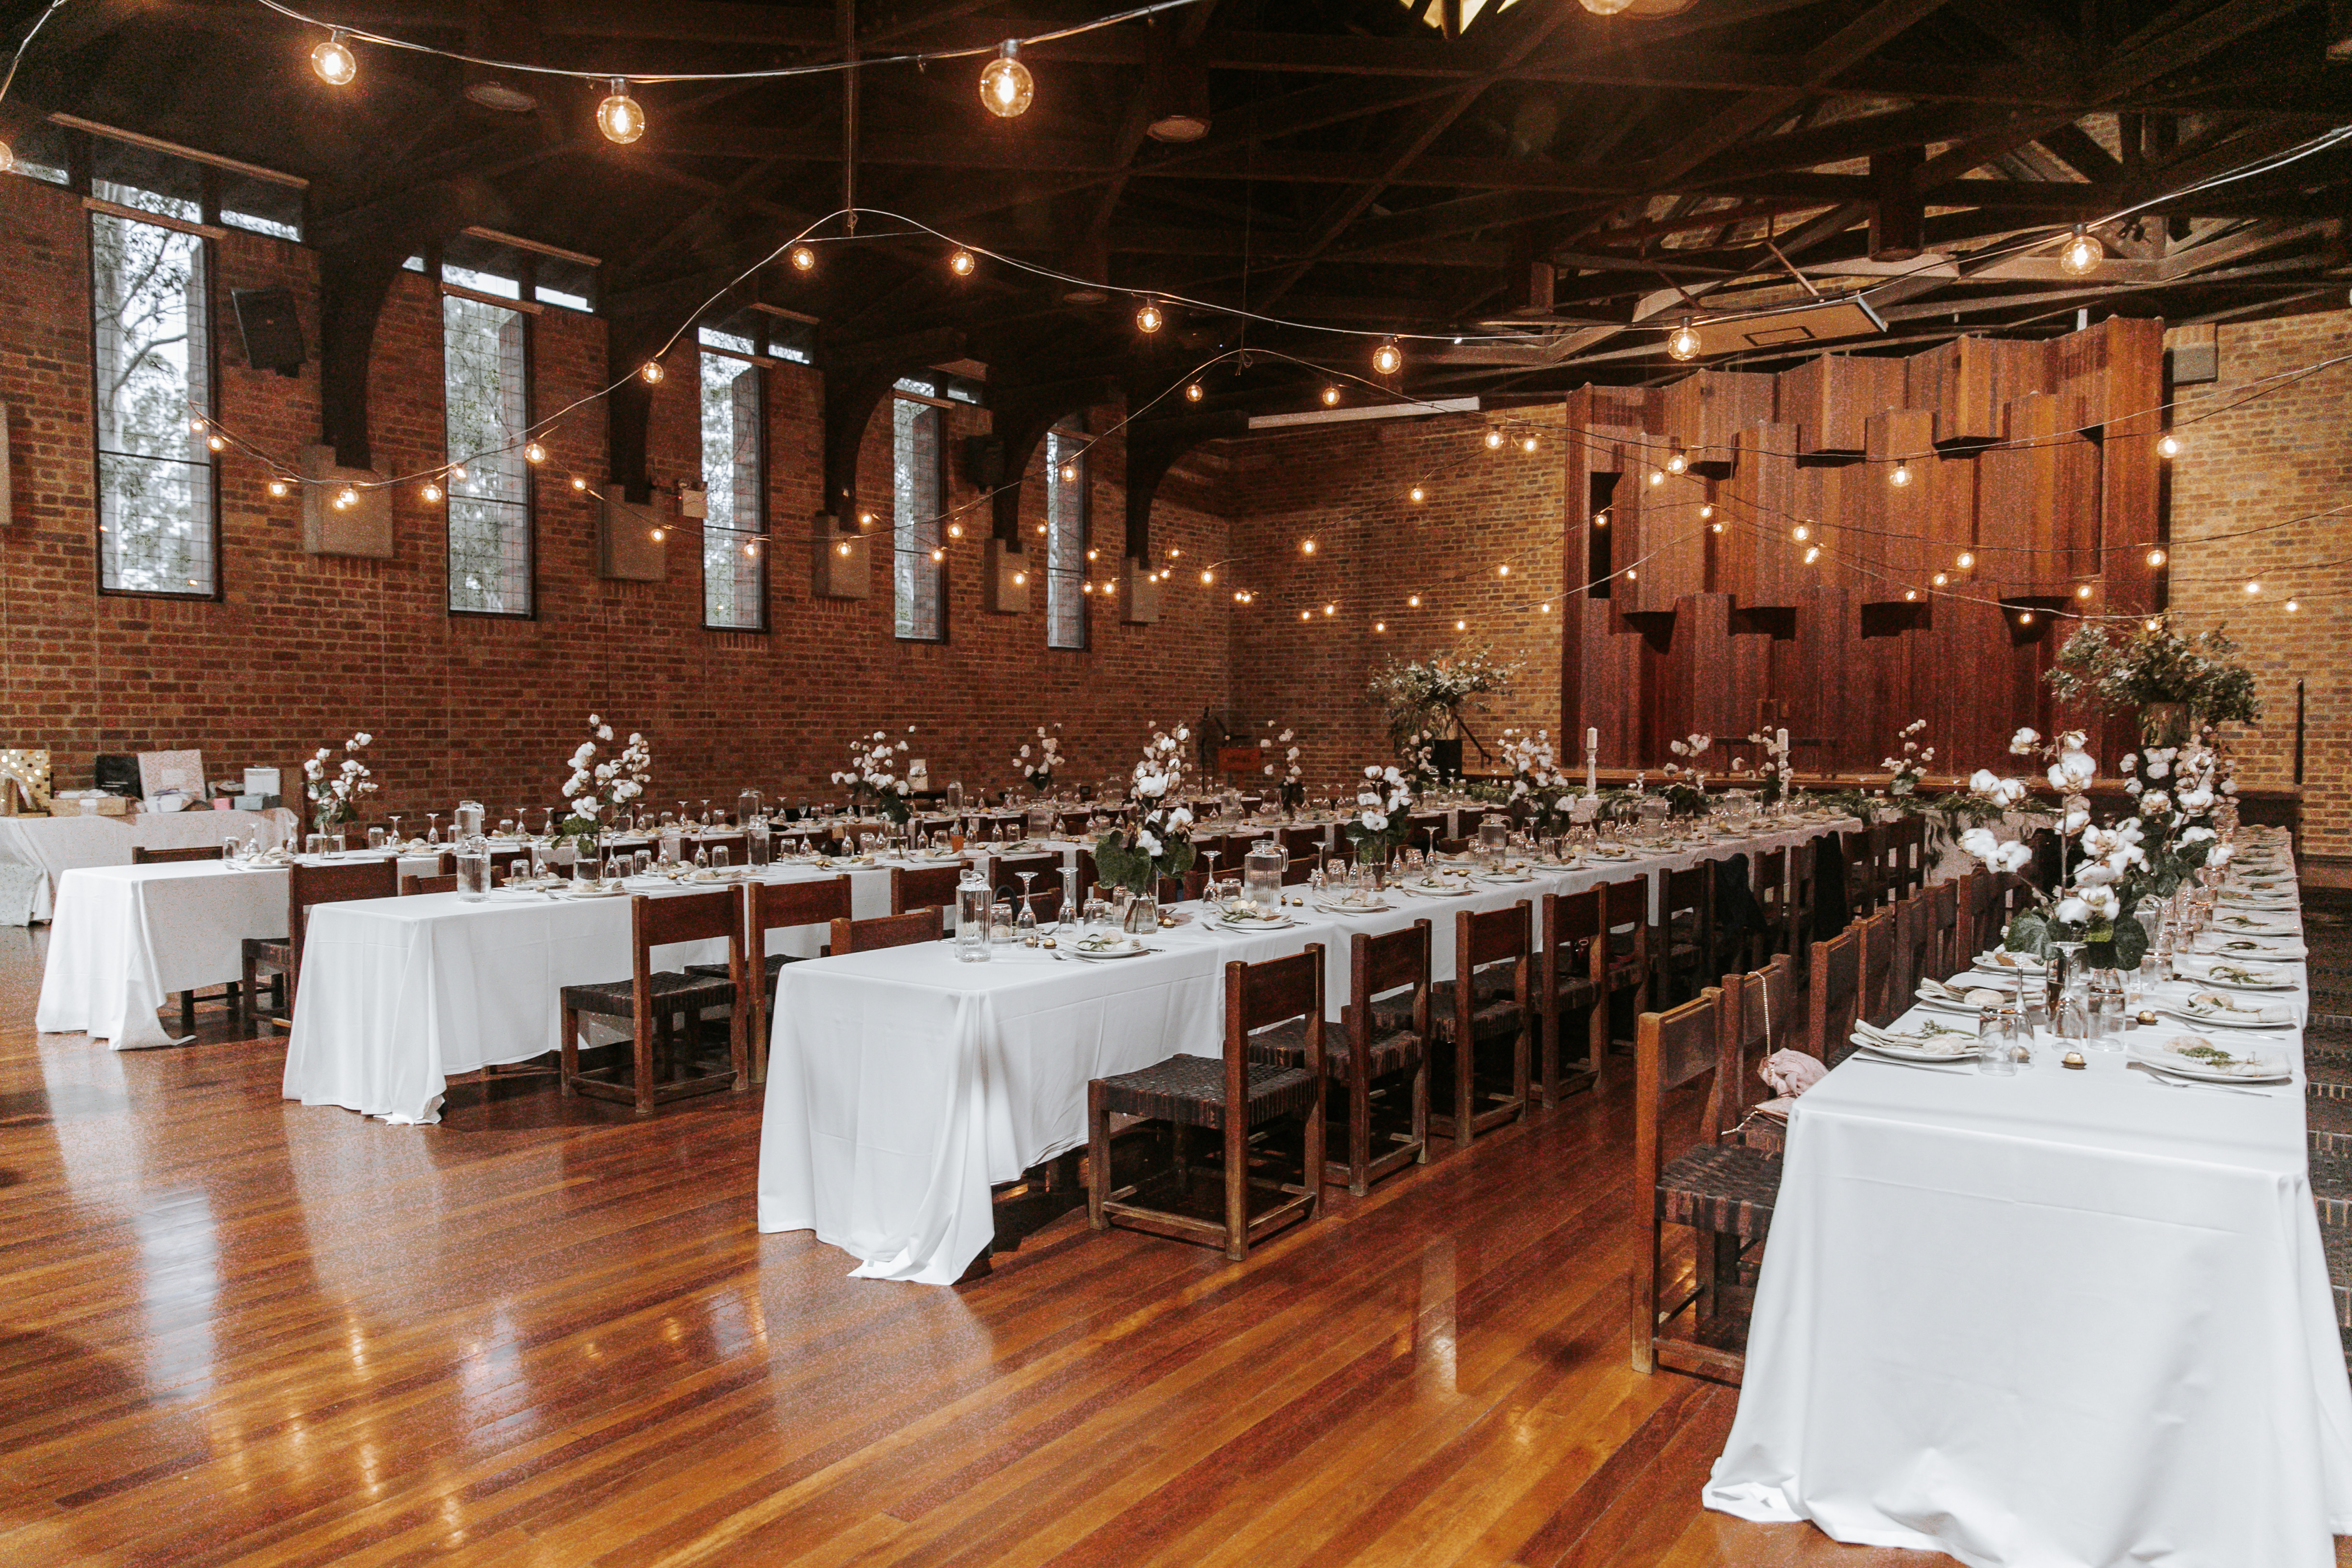 Long tables and chairs with formal settings, light garlands, flowers